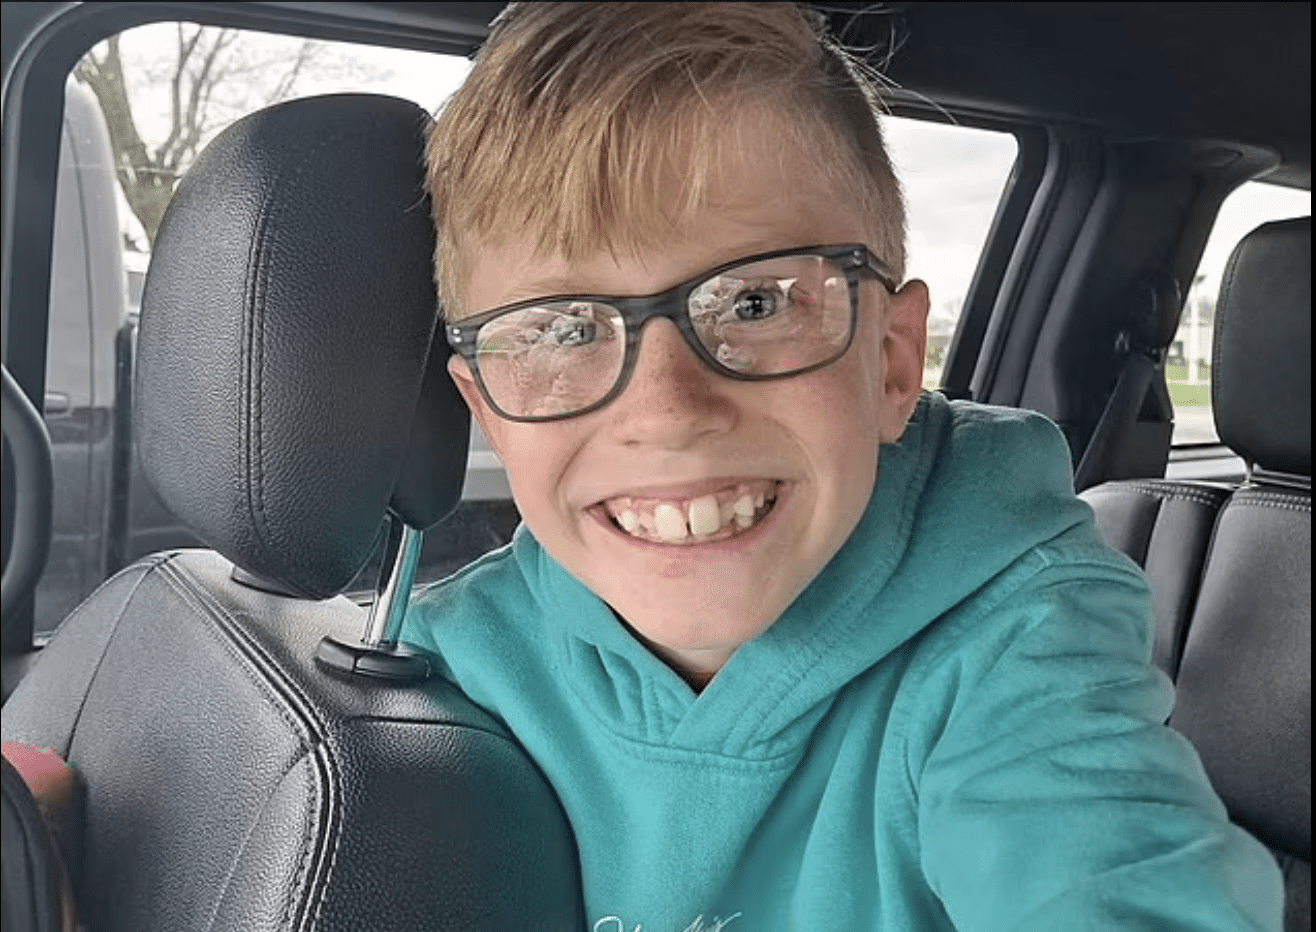 10-year-old boy takes his own life after horrific bullying from classmates over his glasses and teeth